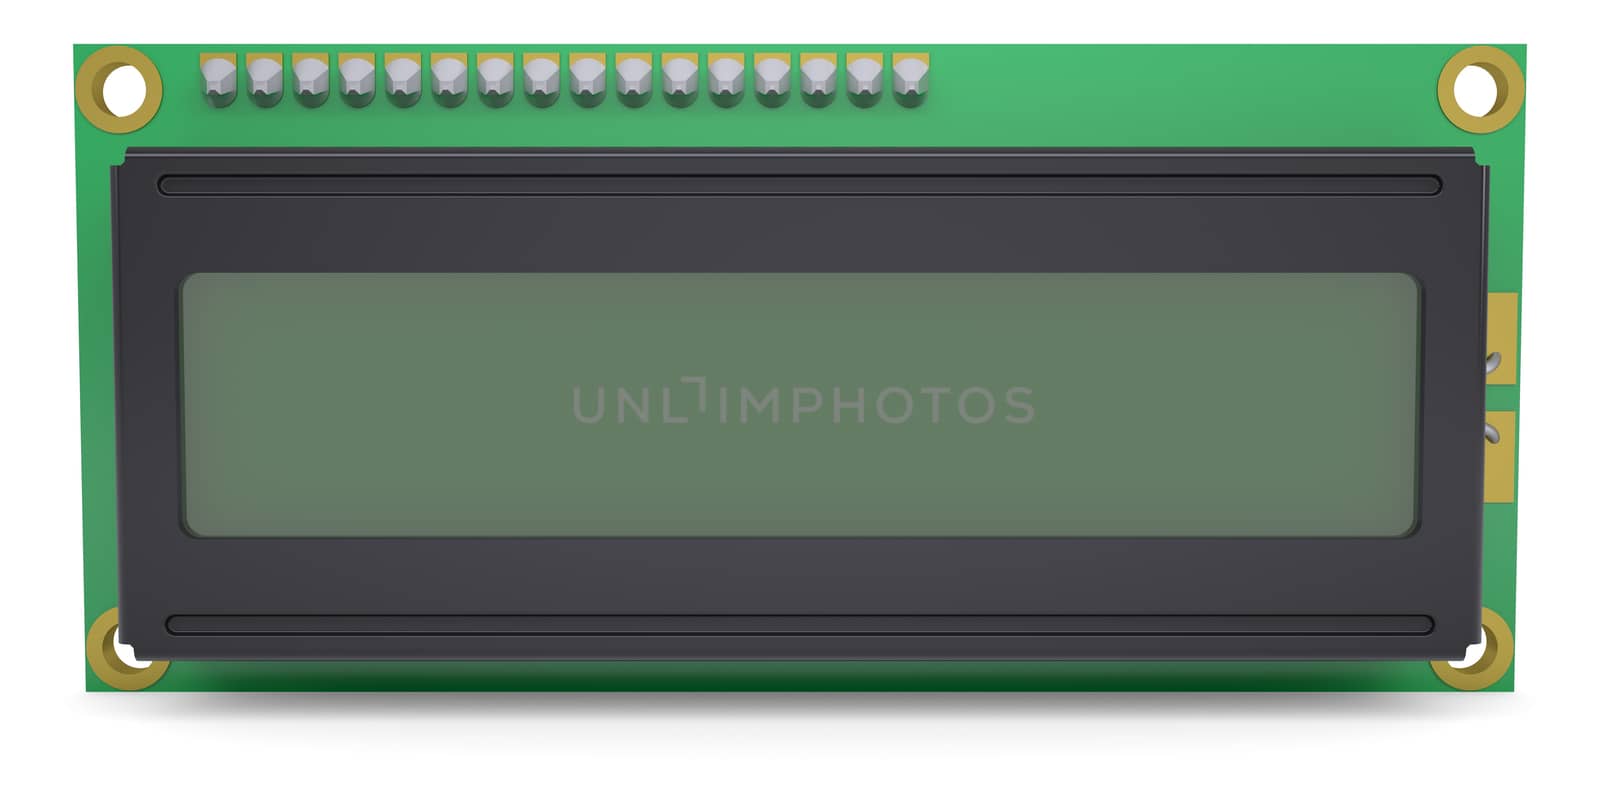 LCD Character Module Display by cherezoff